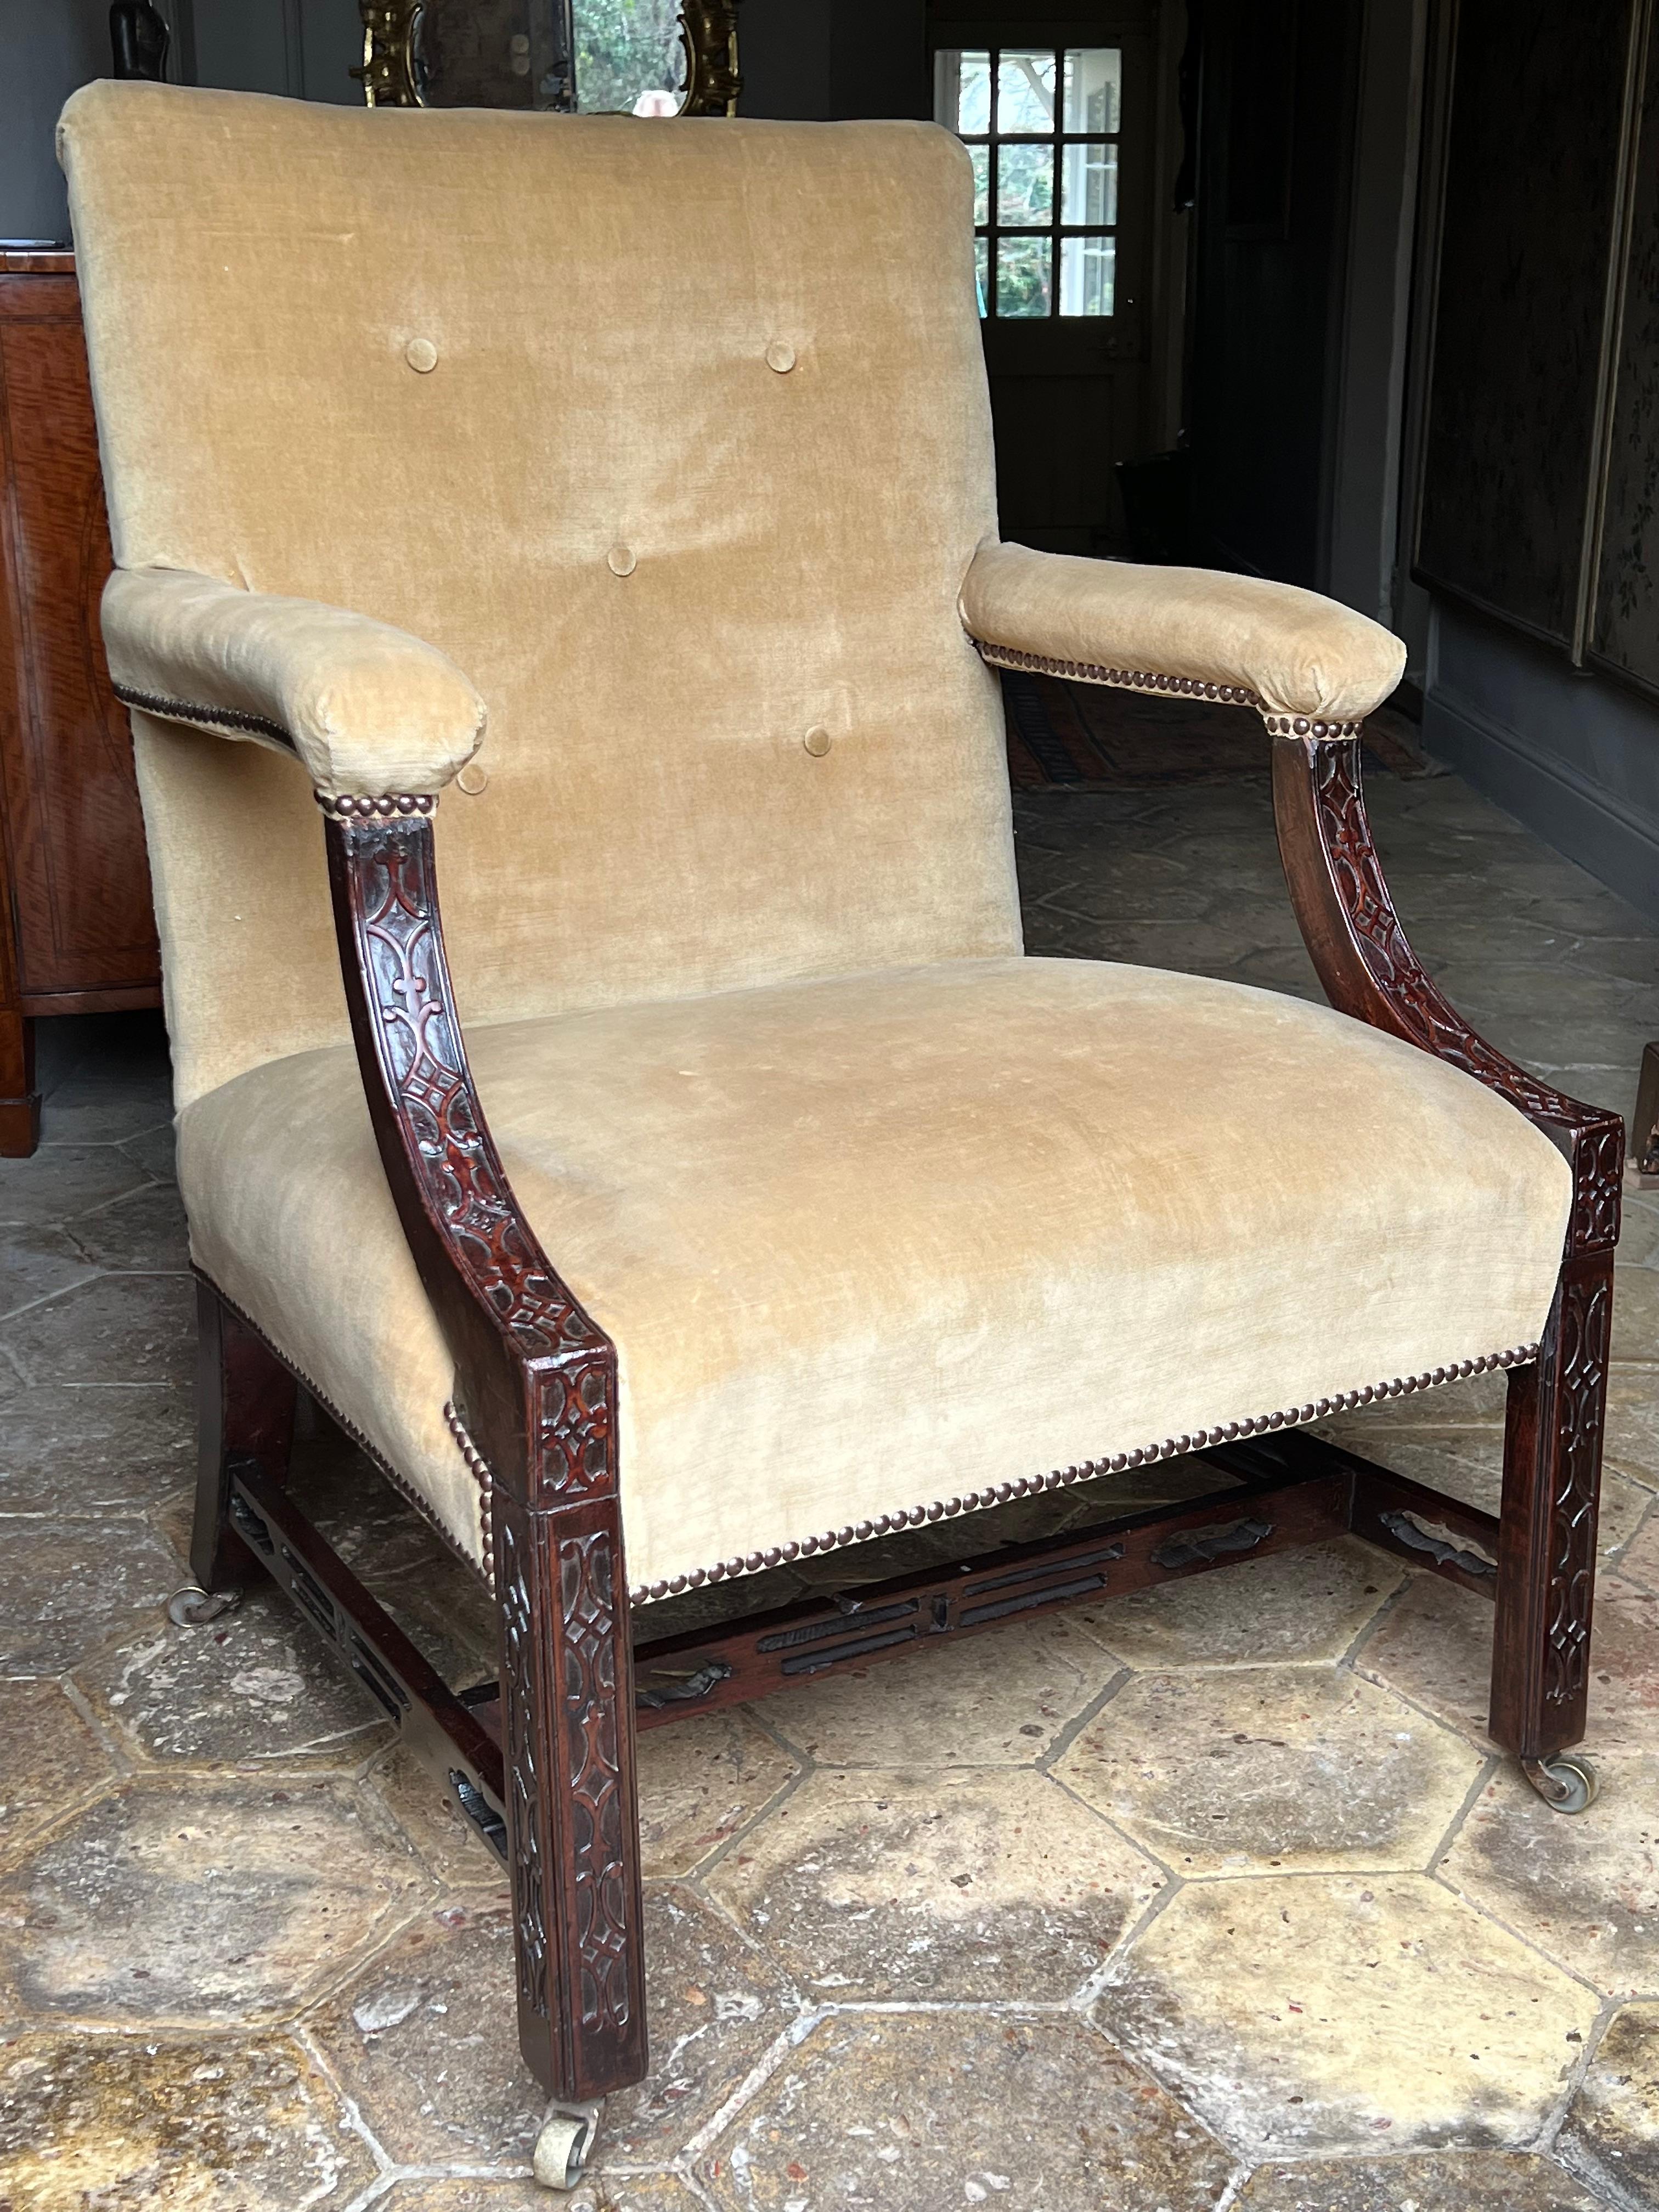 A good Chippendale-period mahogany Gainsborough library armchair, circa 1760.

This is a lovely example of an early-George III Gainsborough armchair in the sophisticated Chinese taste of the period.
With well-executed blind-fret carving to the